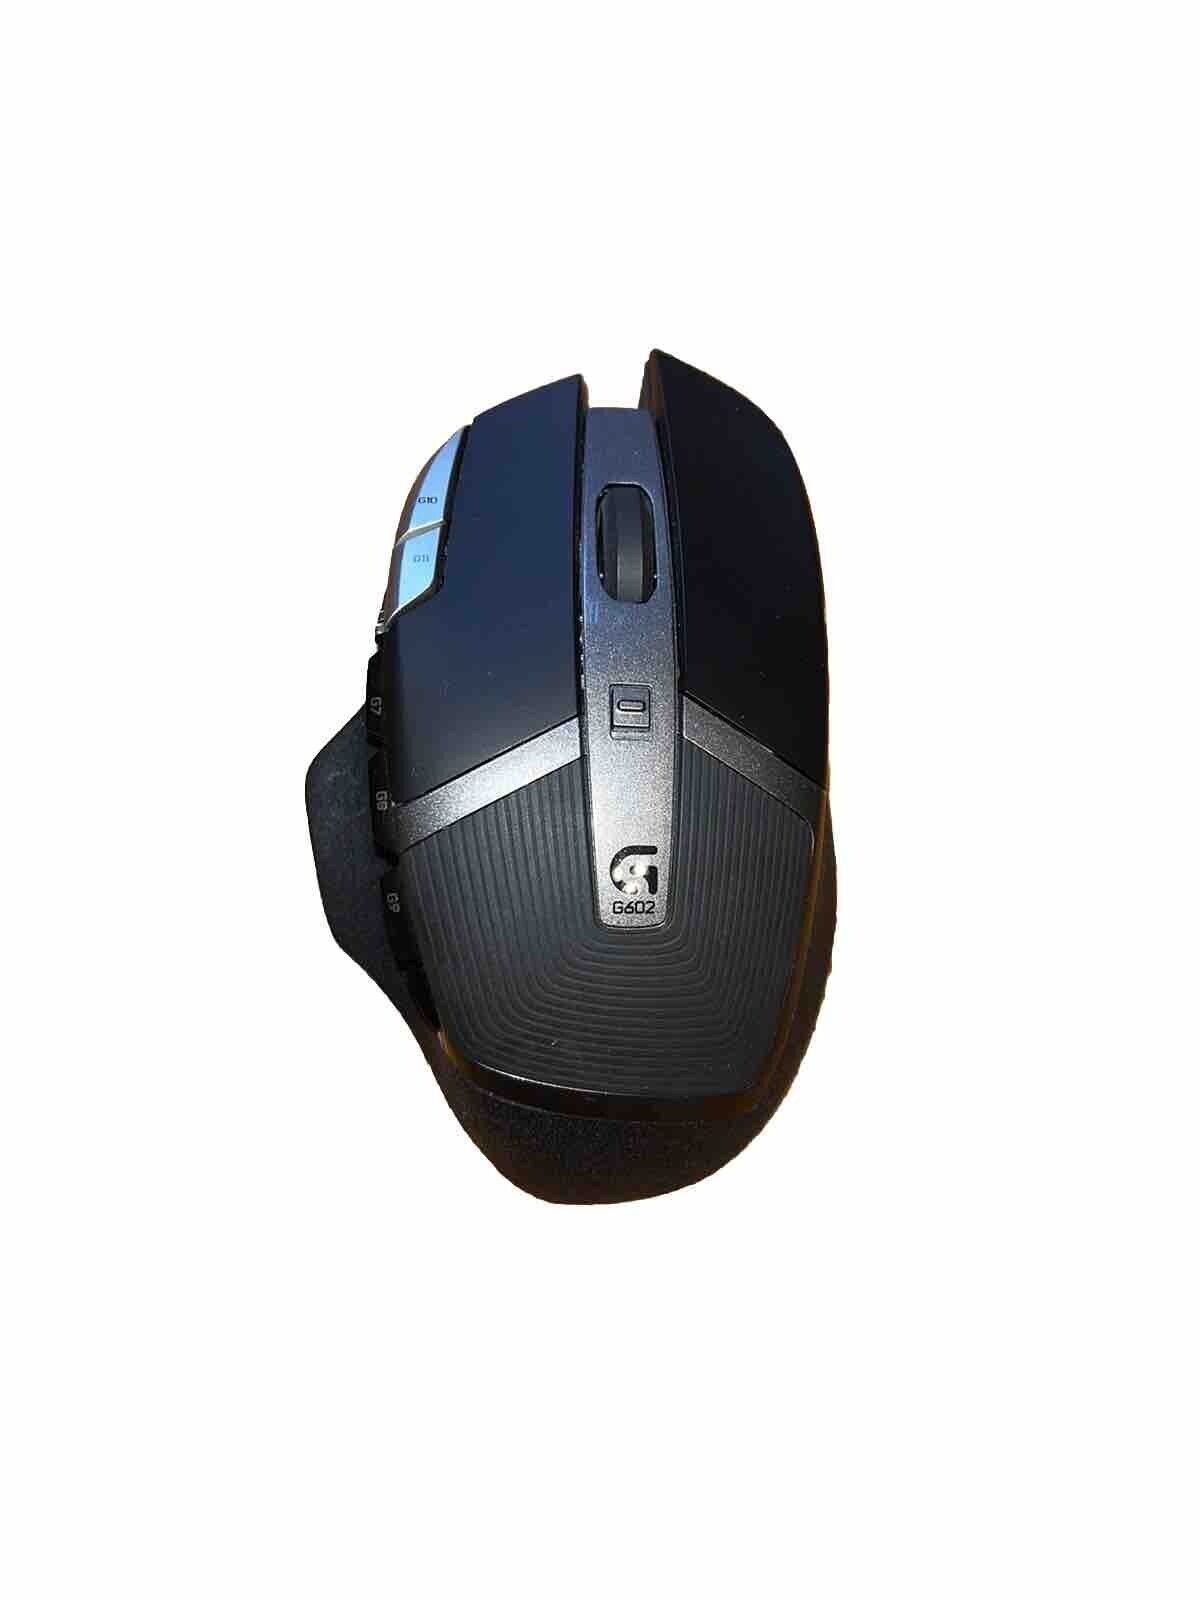 Logitech G602 Wireless Gaming Mouse + Nano Receiver USB Receiver Dongle Read Des